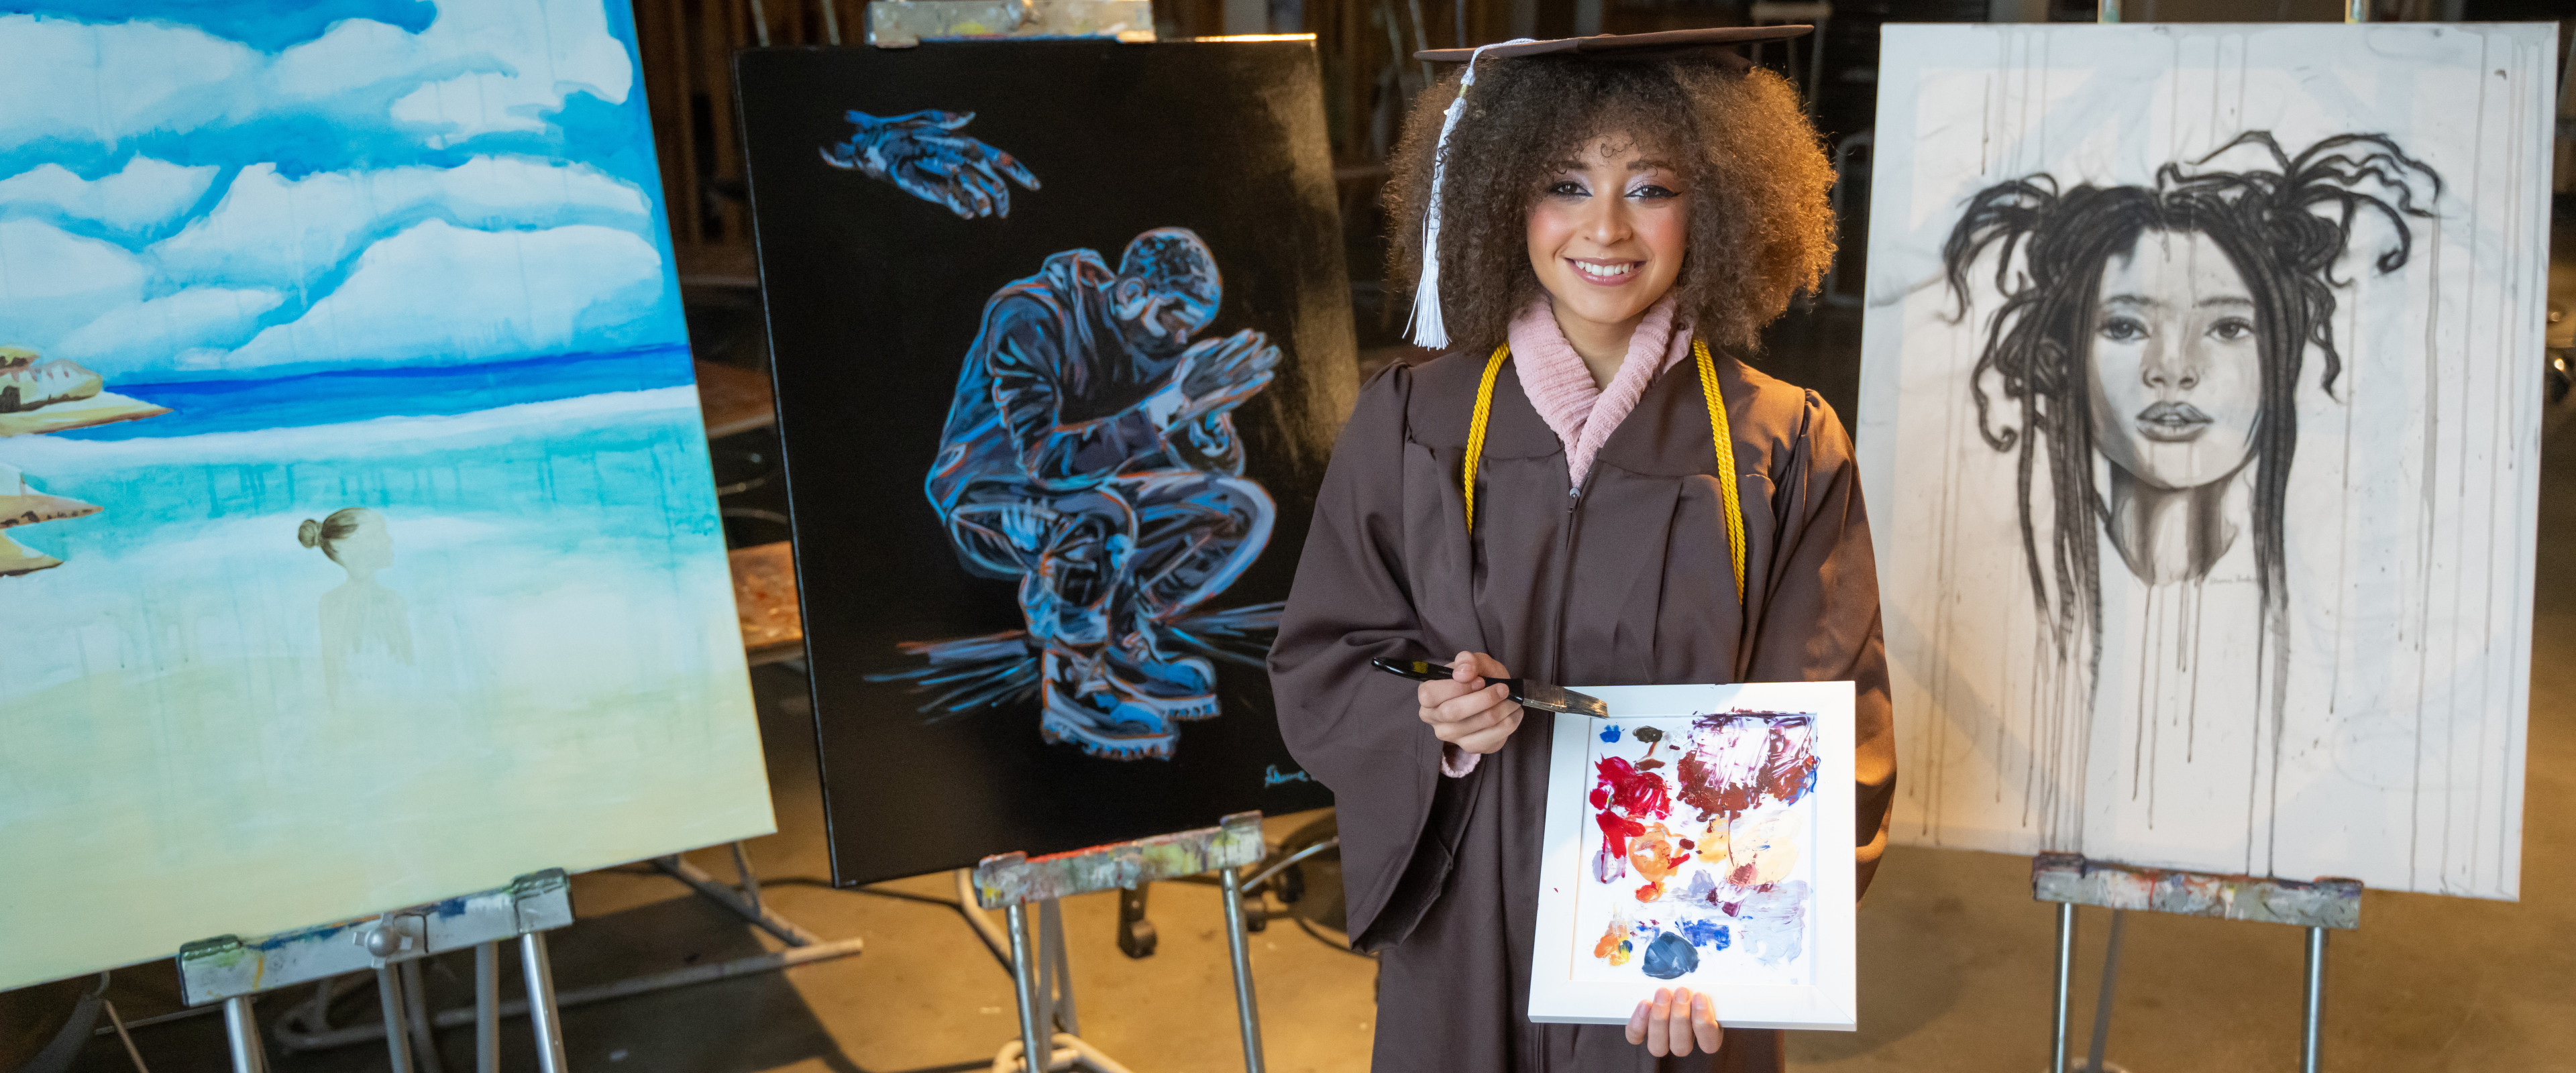 Sharmane Flanders stands in her graduation regalia in front of three of her finished paintings while holding another colorful canvas.